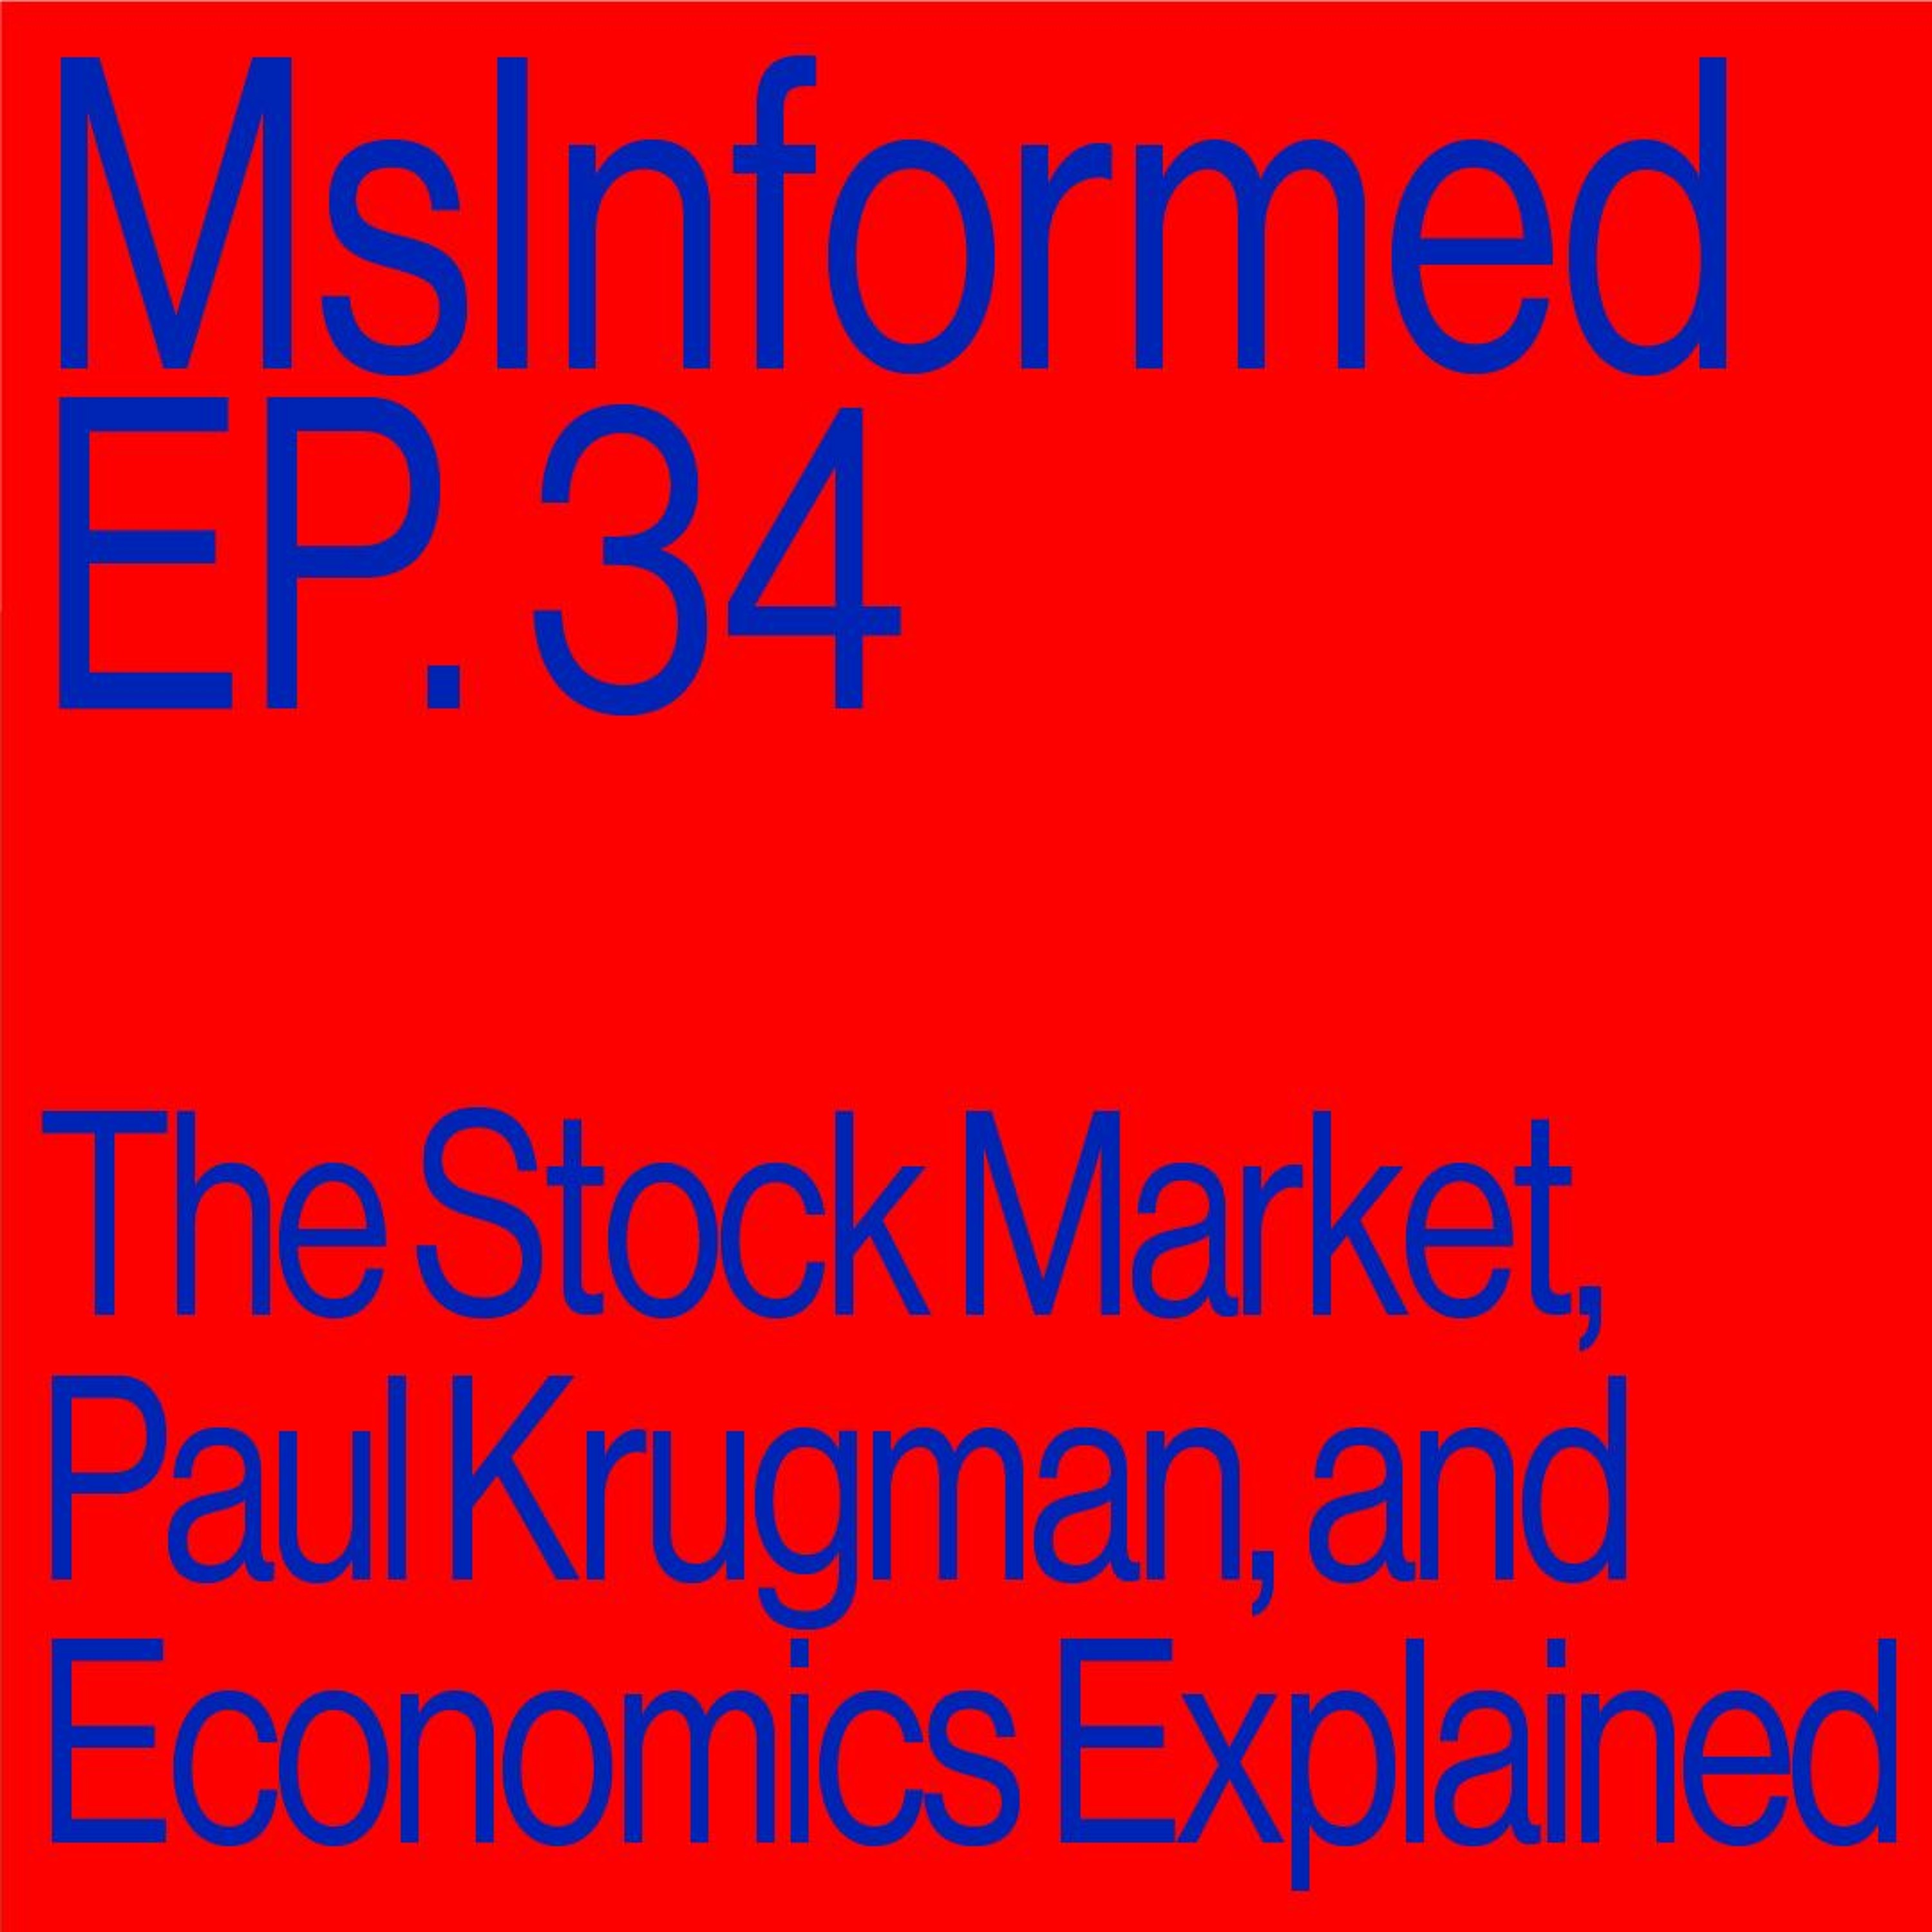 Episode 34: The Stock Market, Paul Krugman, And What We Learnt About The Economy